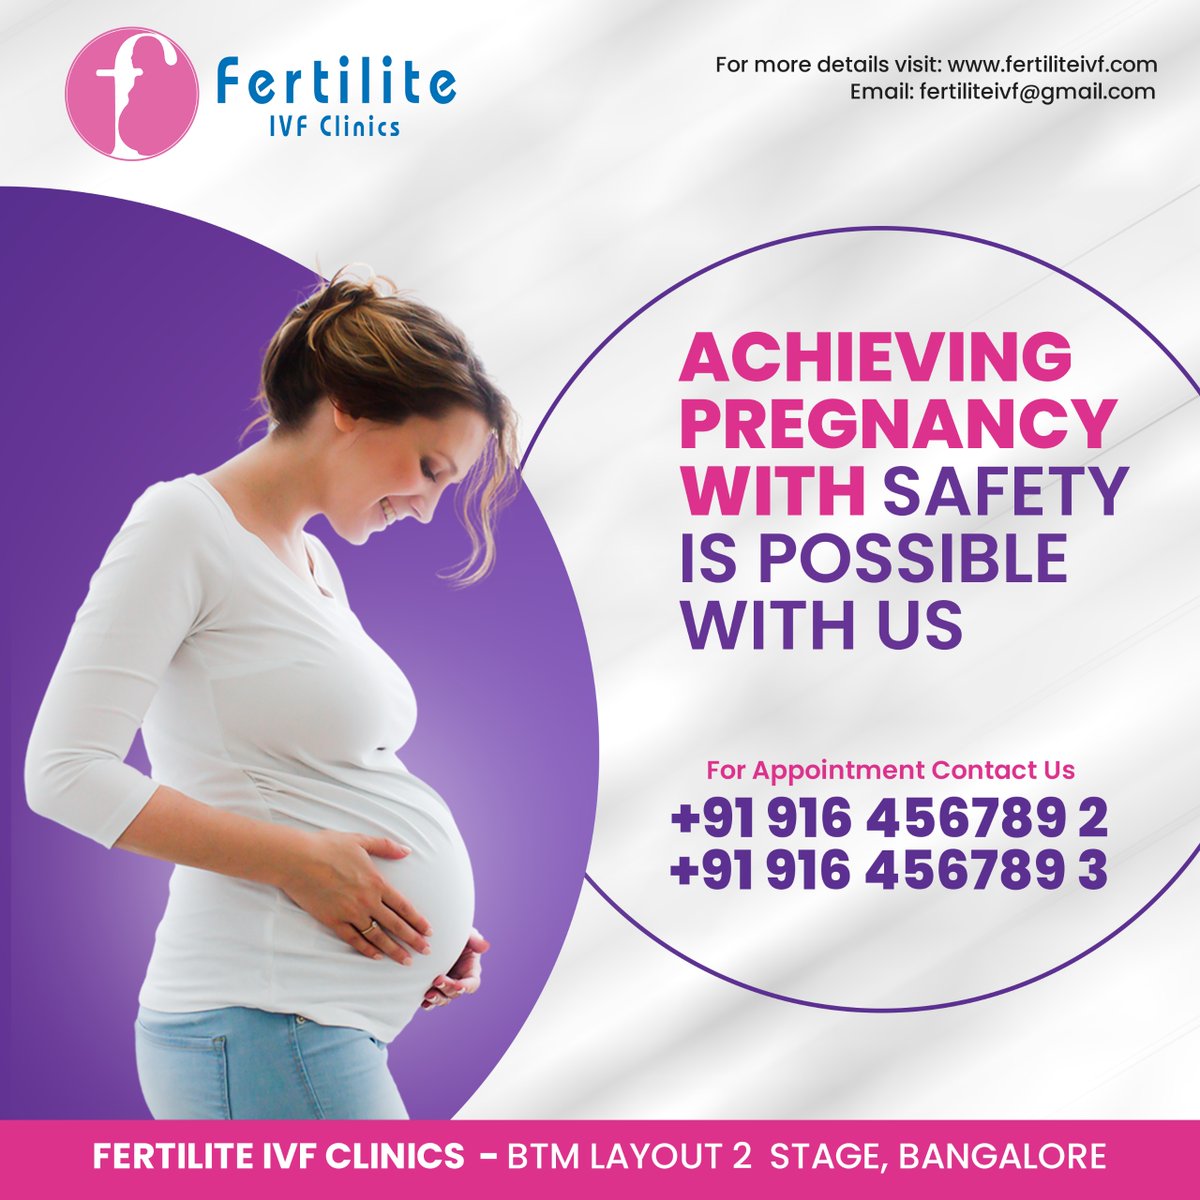 🌟 **Fertilite IVF Clinics** 🌟
Achieving Pregnancy with Safety is Possible with Us!

For more details, visit: fertiliteivf.com
📧 Email: fertiliteivf@gmail.com

🏥 **Location:**
Fertilite IVF Clinics
BTM Layout 2 Stage, Bangalore

#IVF #FertilityClinic #Pregnancy